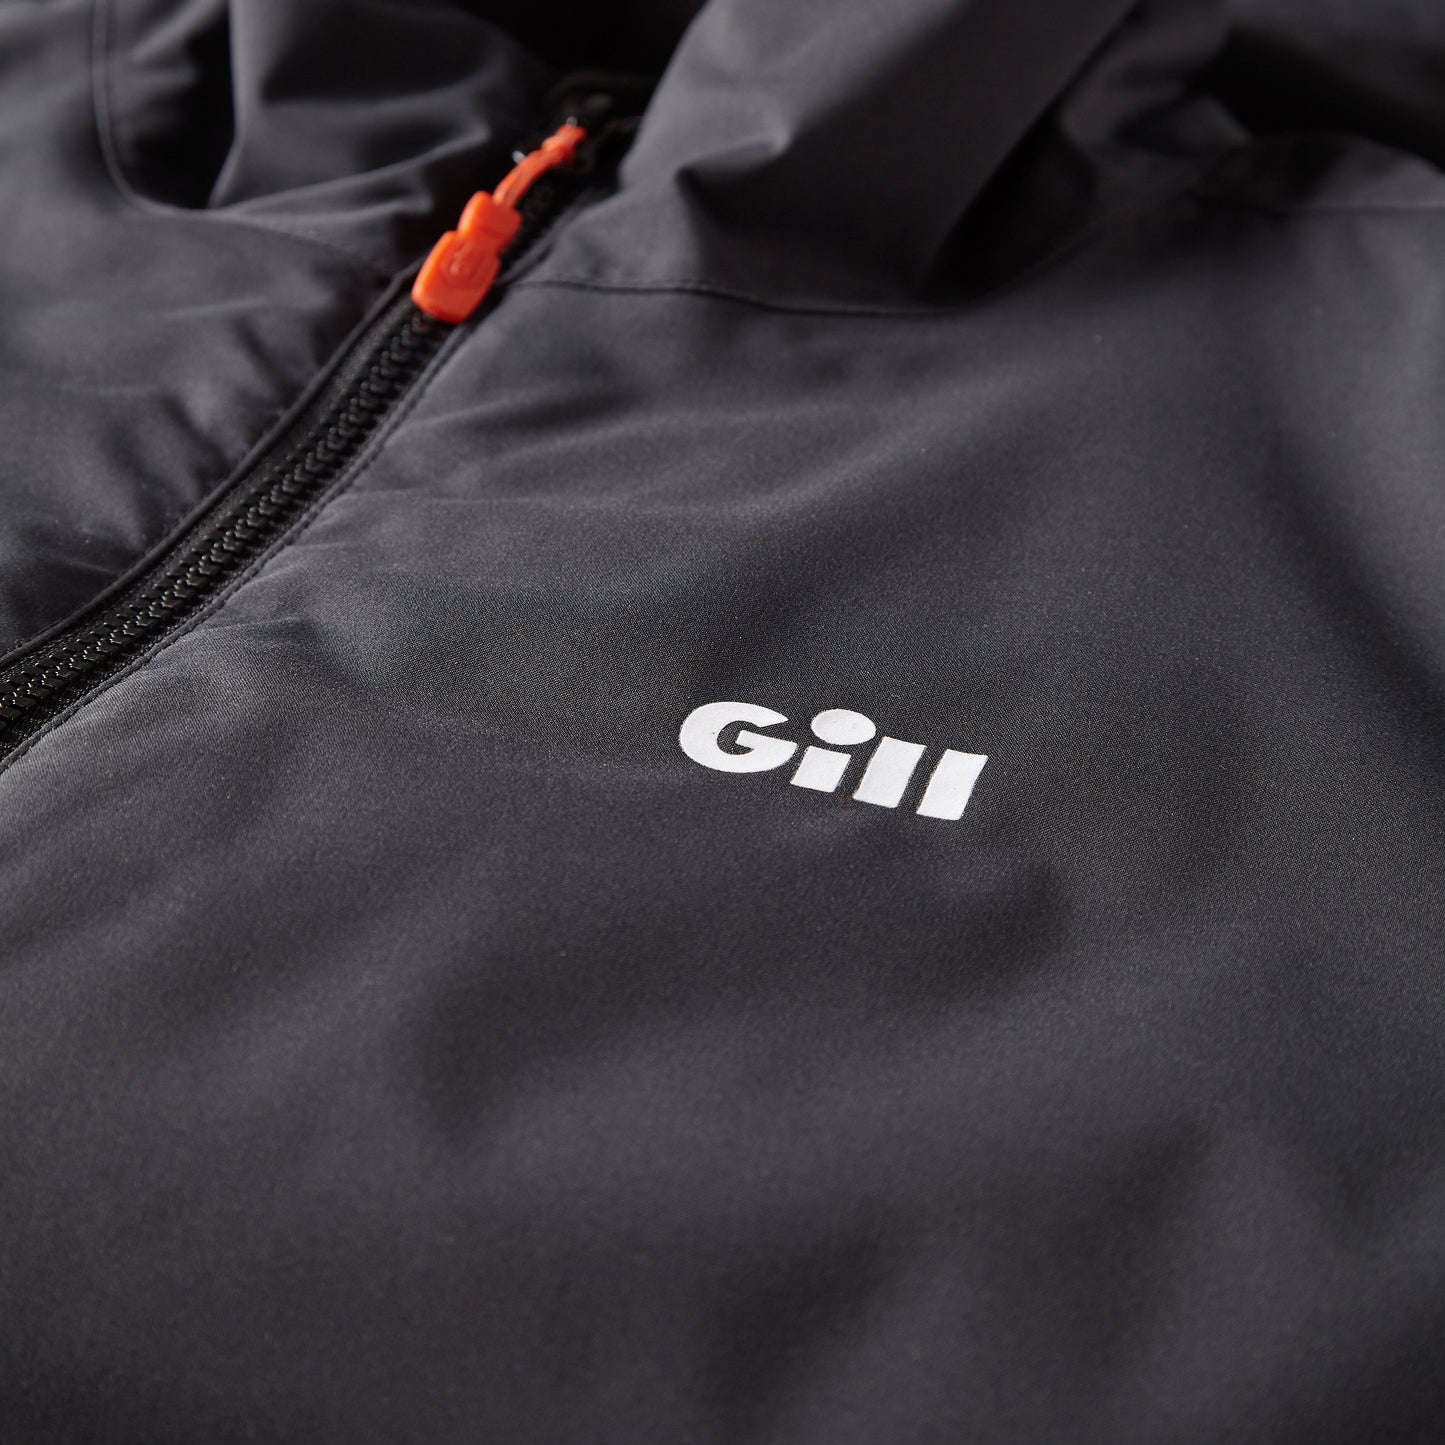 Gill Men's OS Insulated Jacket Graphite